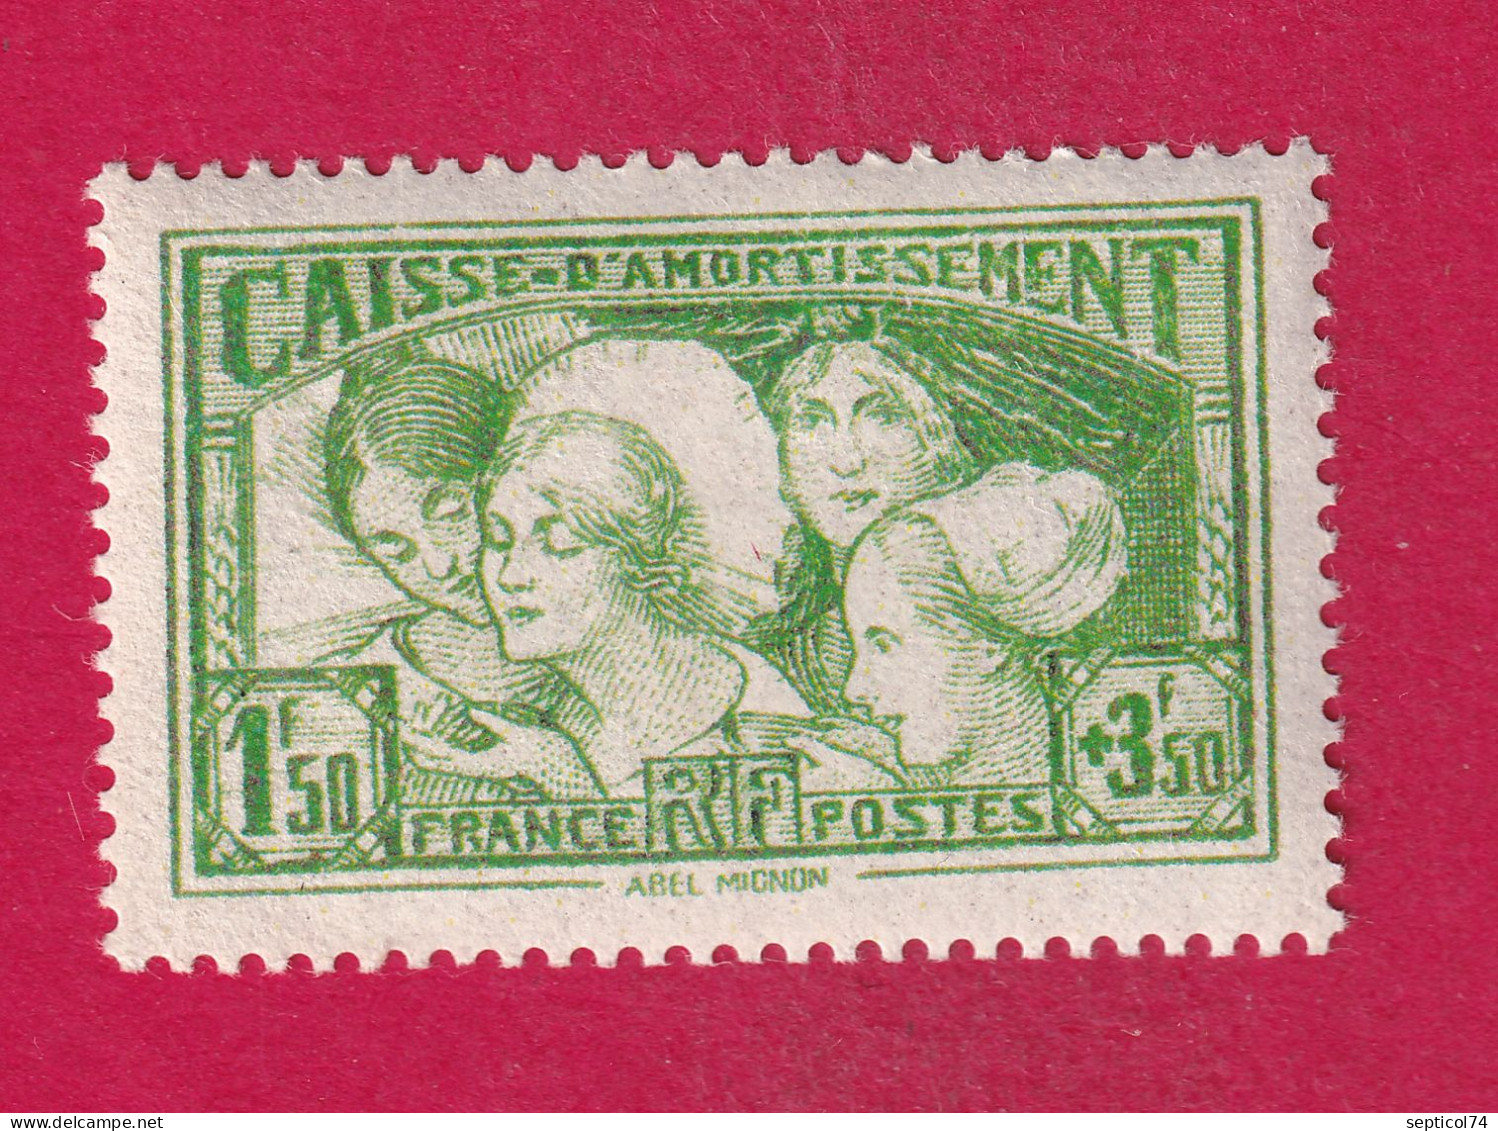 N°269 PROVINCES NEUF SANS CHARNIERE UNE PETITE ADHERENCE CONSIDERE COMME AVEC TRACE DE CHARNIER TIMBRE STAMP BRIEFMARKEN - 1927-31 Sinking Fund